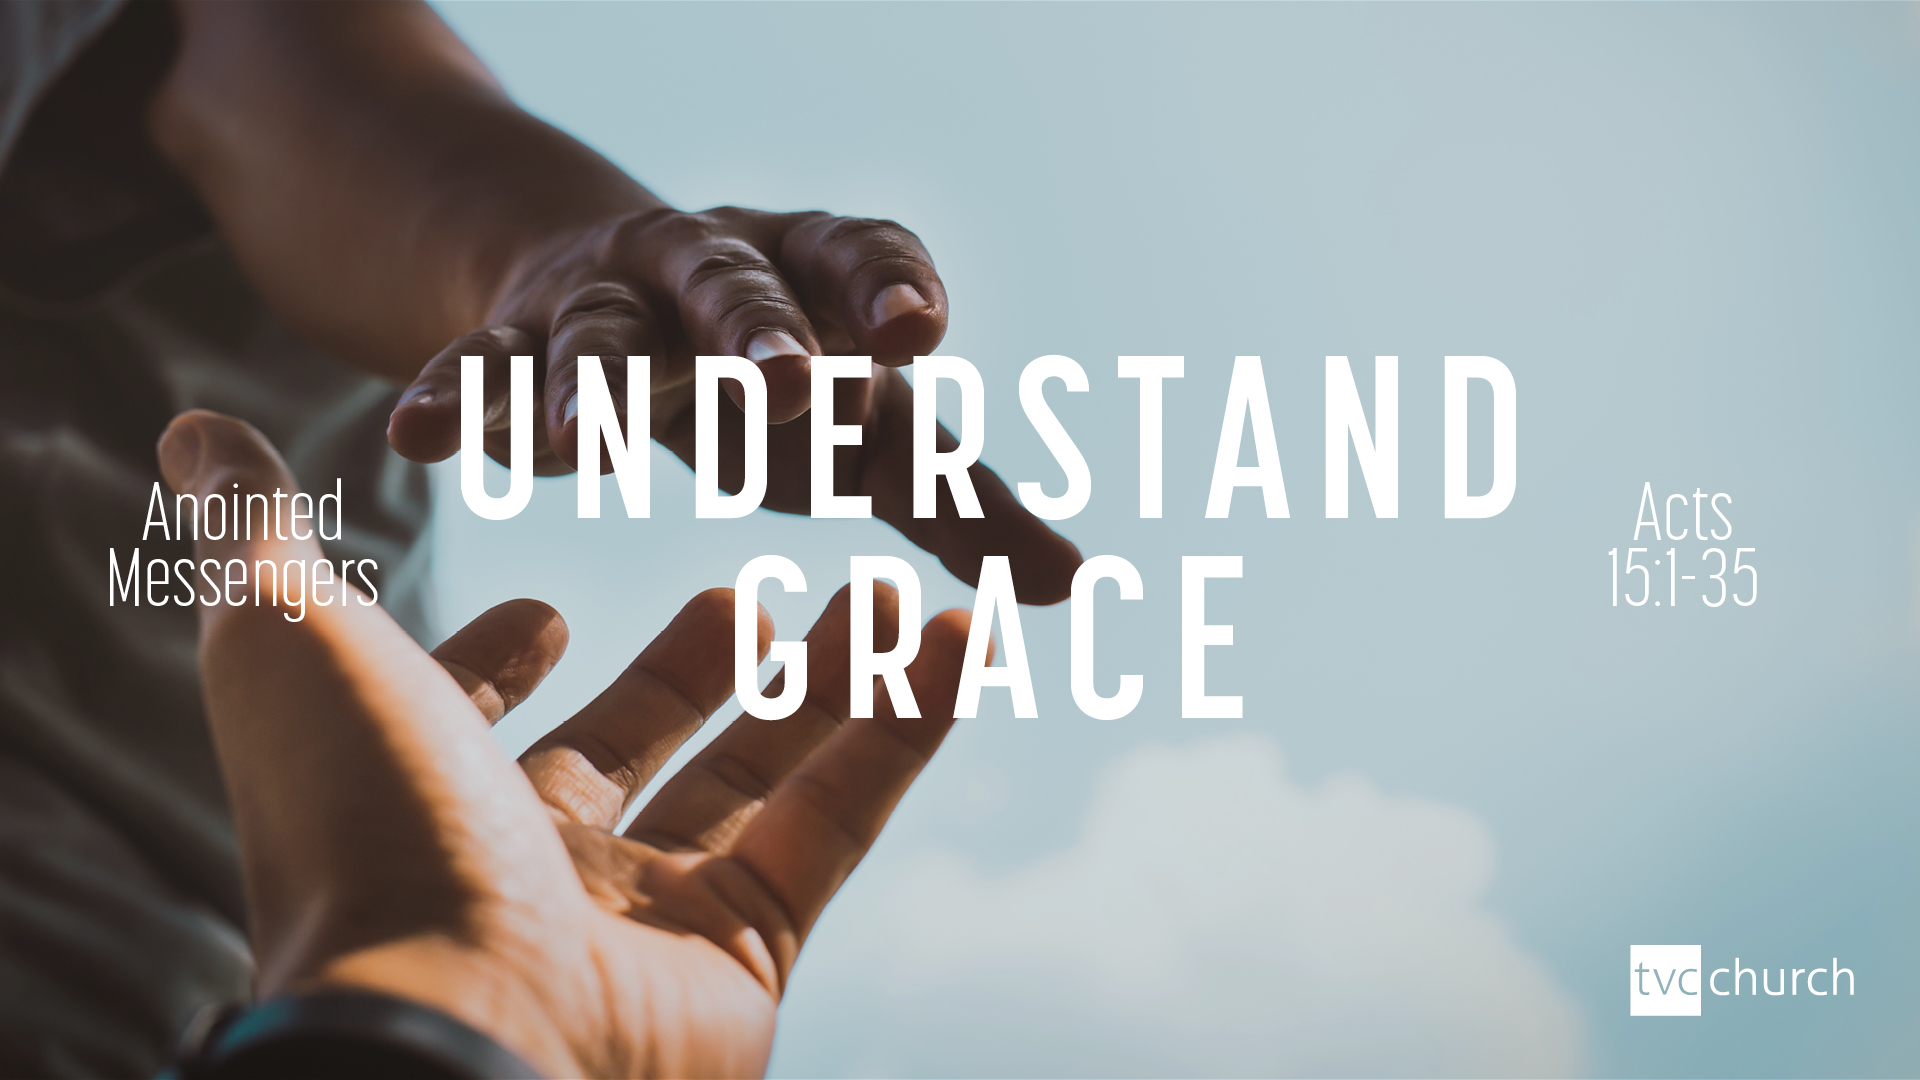 Anointed Messengers… Understand Grace